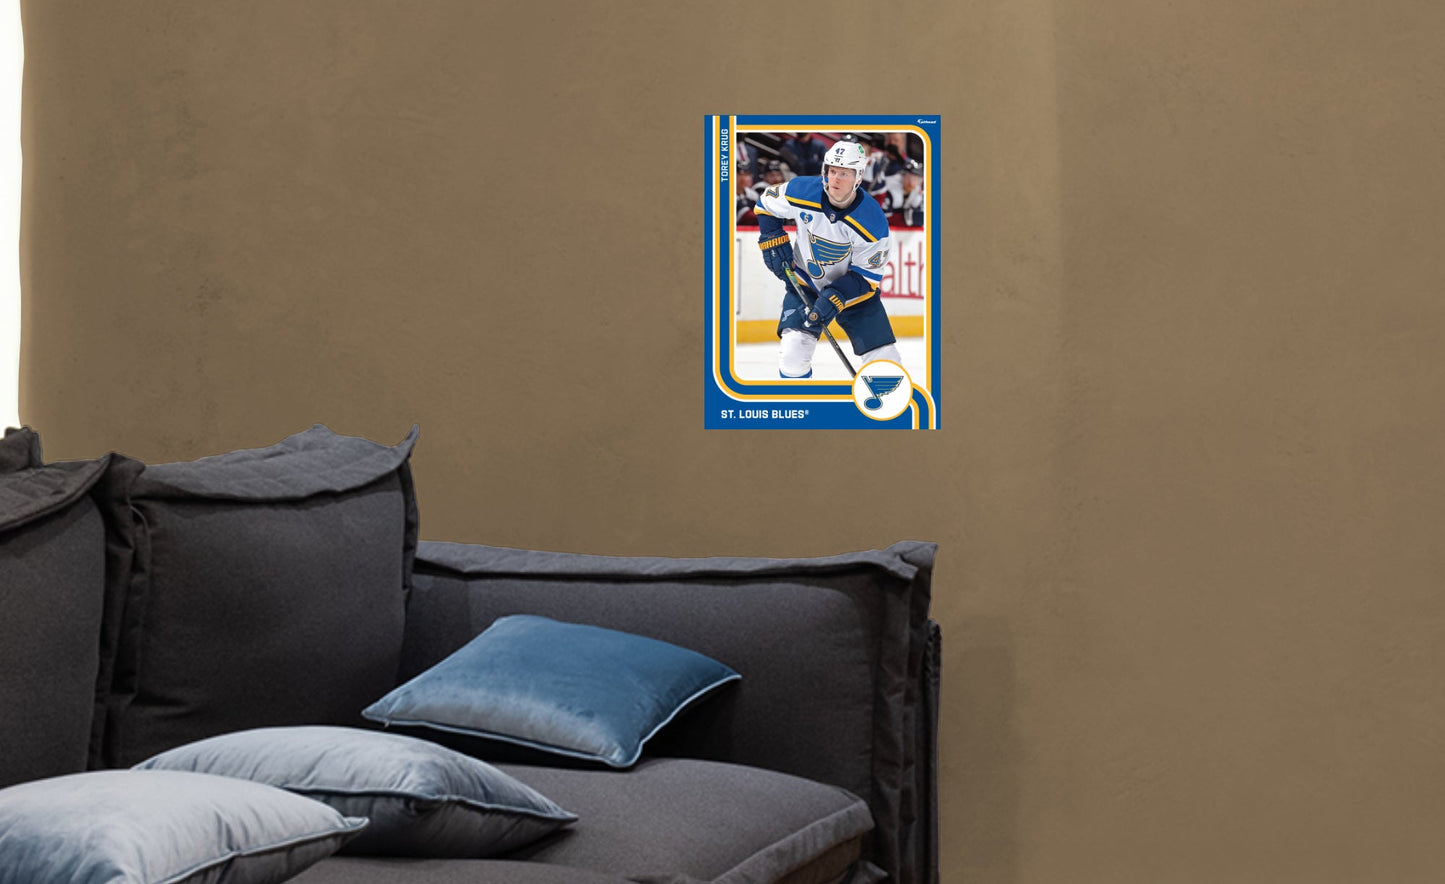 St. Louis Blues: Torey Krug Poster - Officially Licensed NHL Removable Adhesive Decal